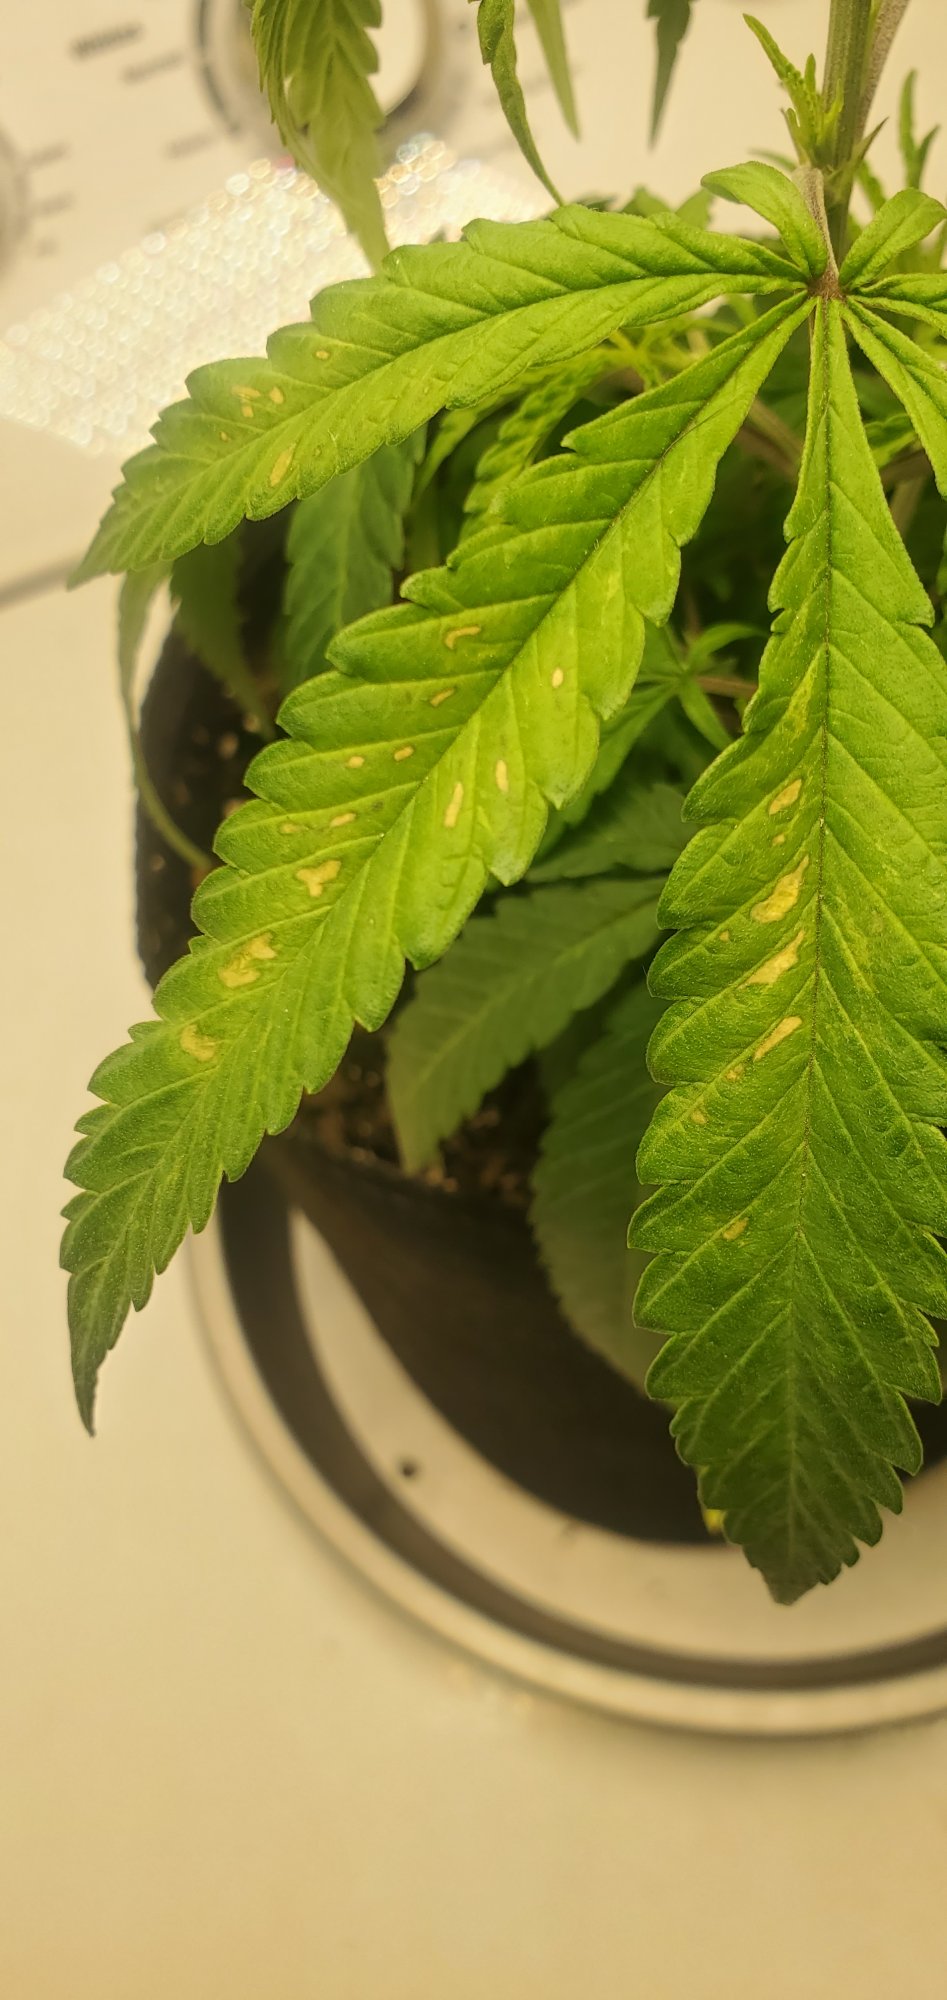 New grower please help me out